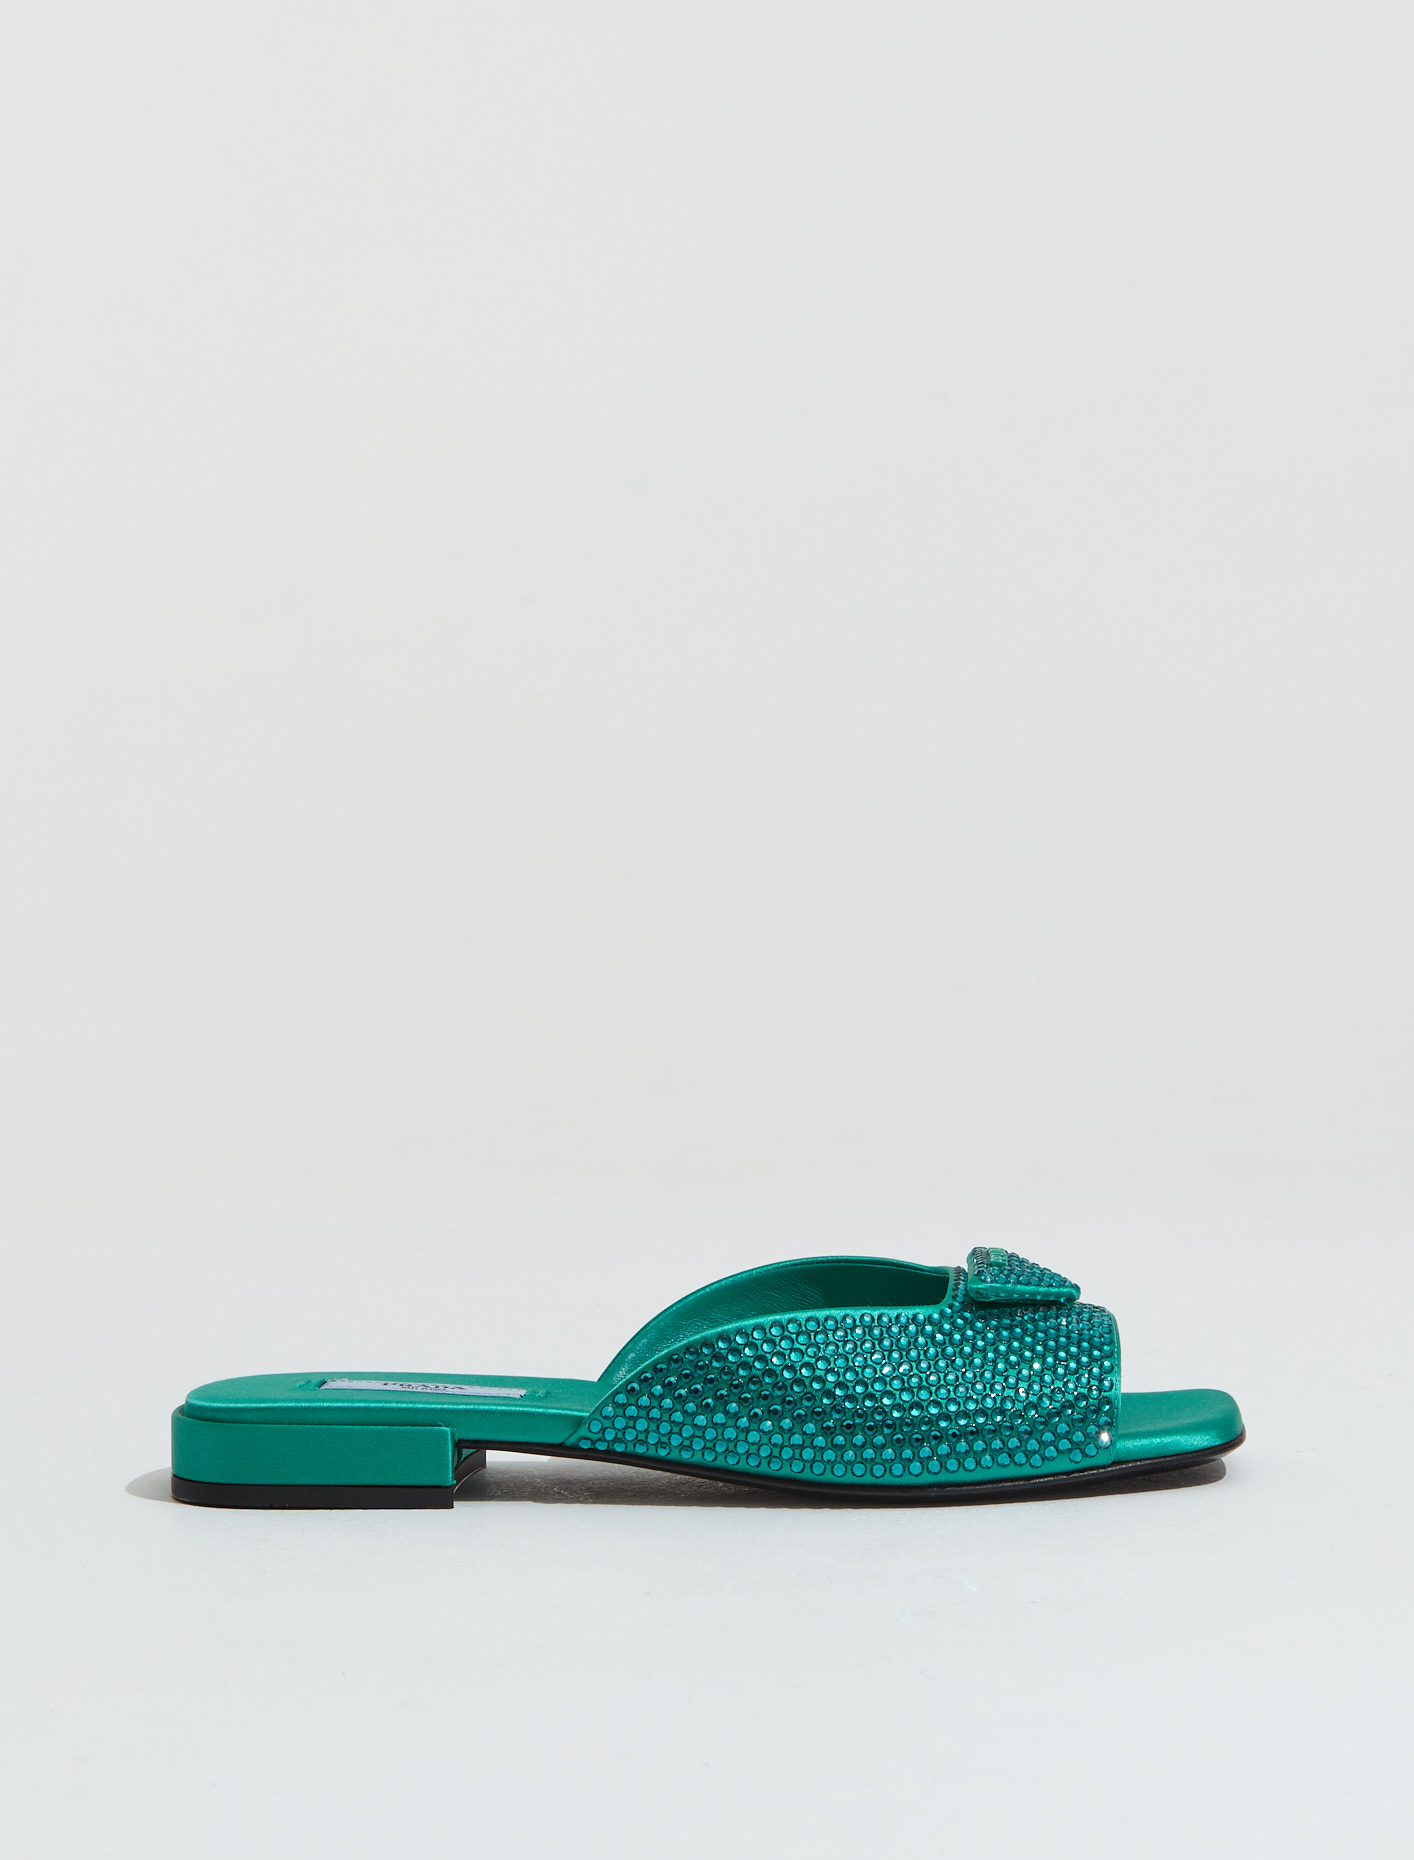 Prada Flat Sandals with Crystals in Turquoise | Voo Store Berlin |  Worldwide Shipping